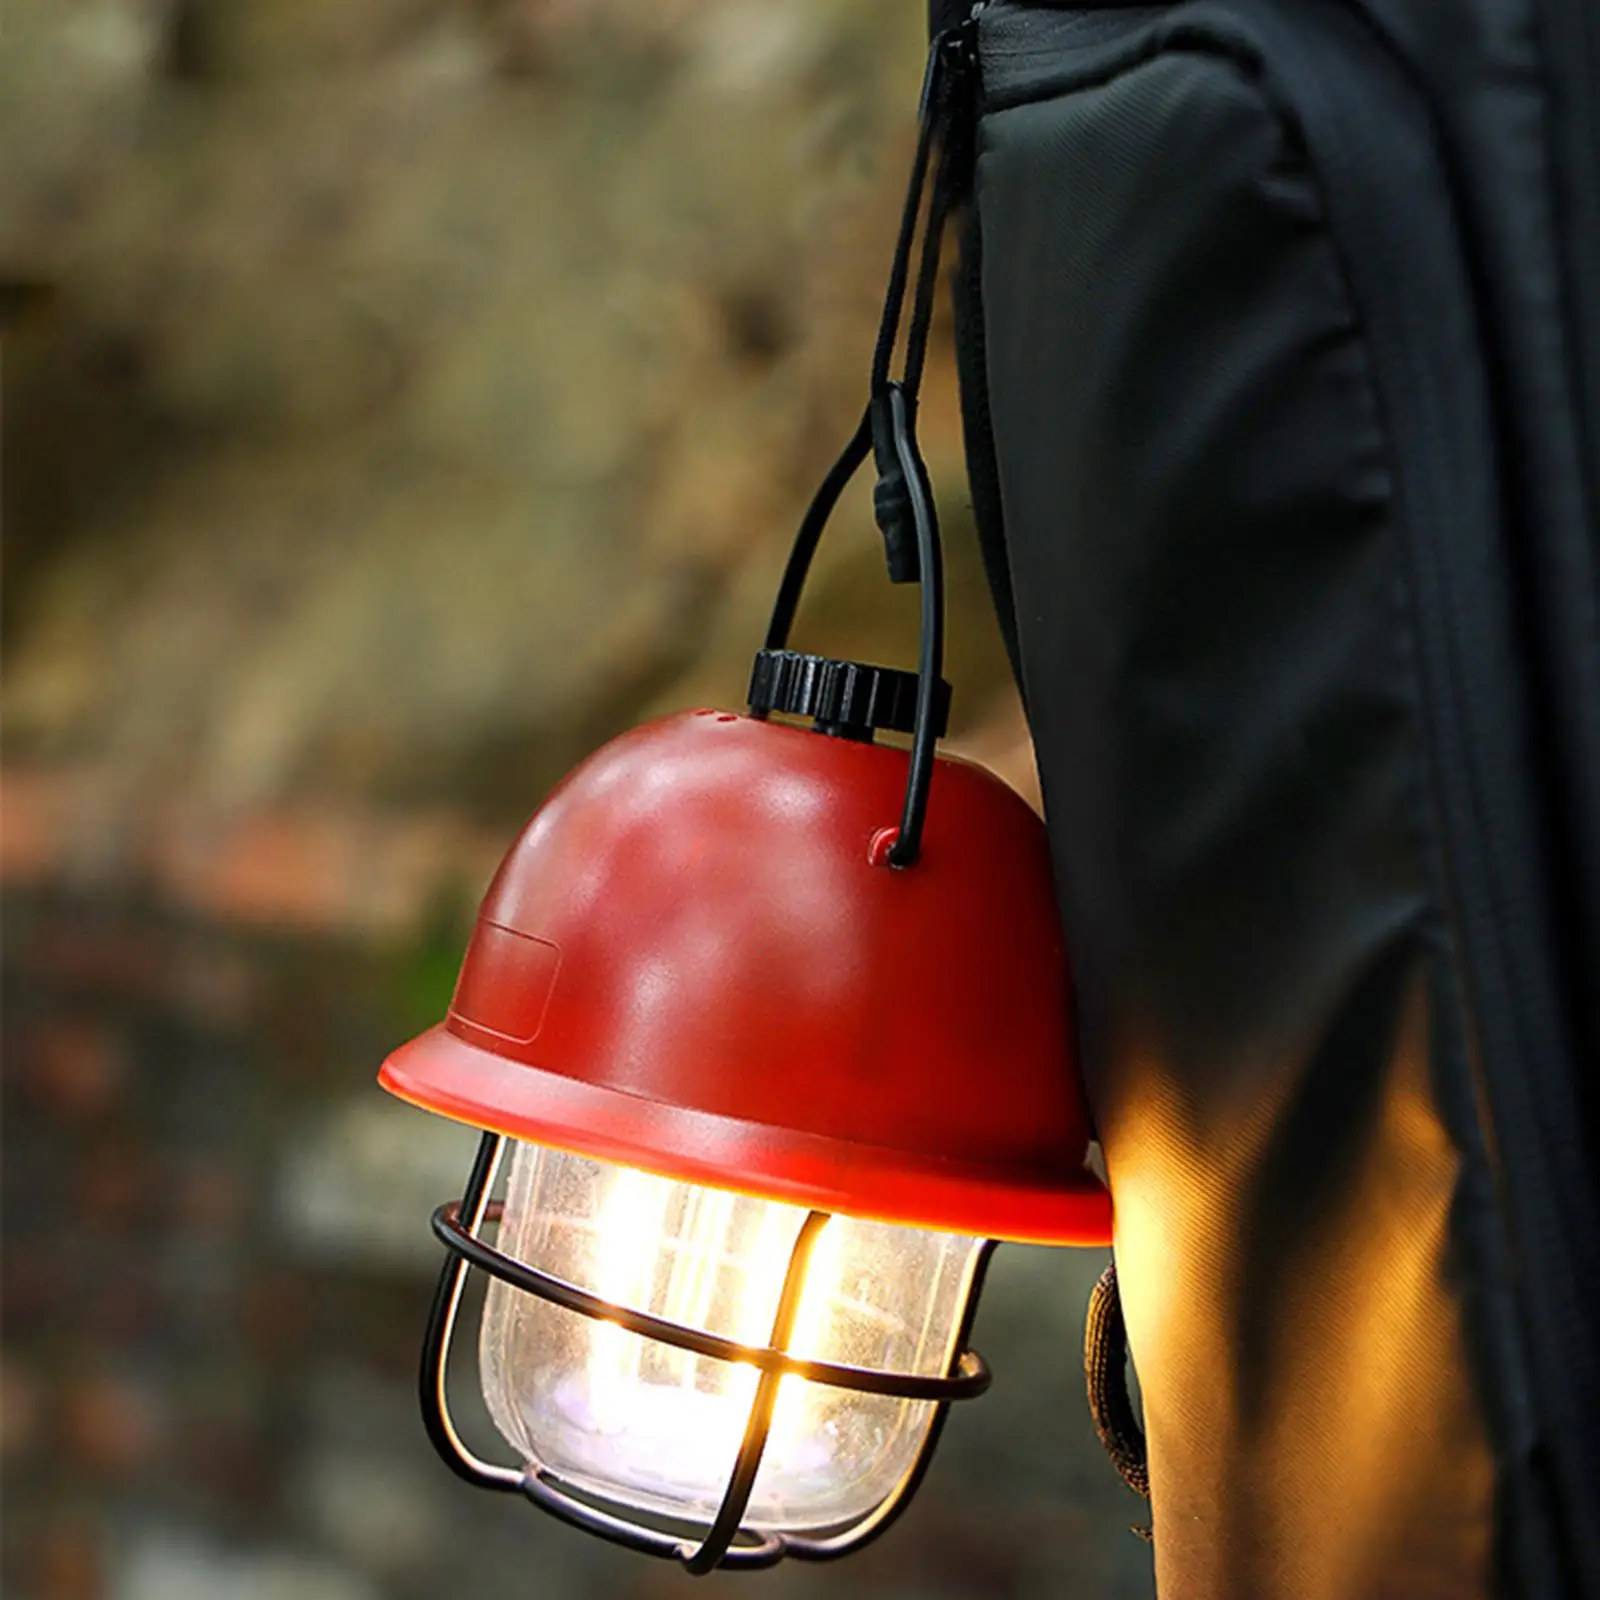 Vintage Warm Light LED Camp Lantern Rechargeable Waterproof Hanging Garden Lights for Courtyard Party Yard Pathway Lawn